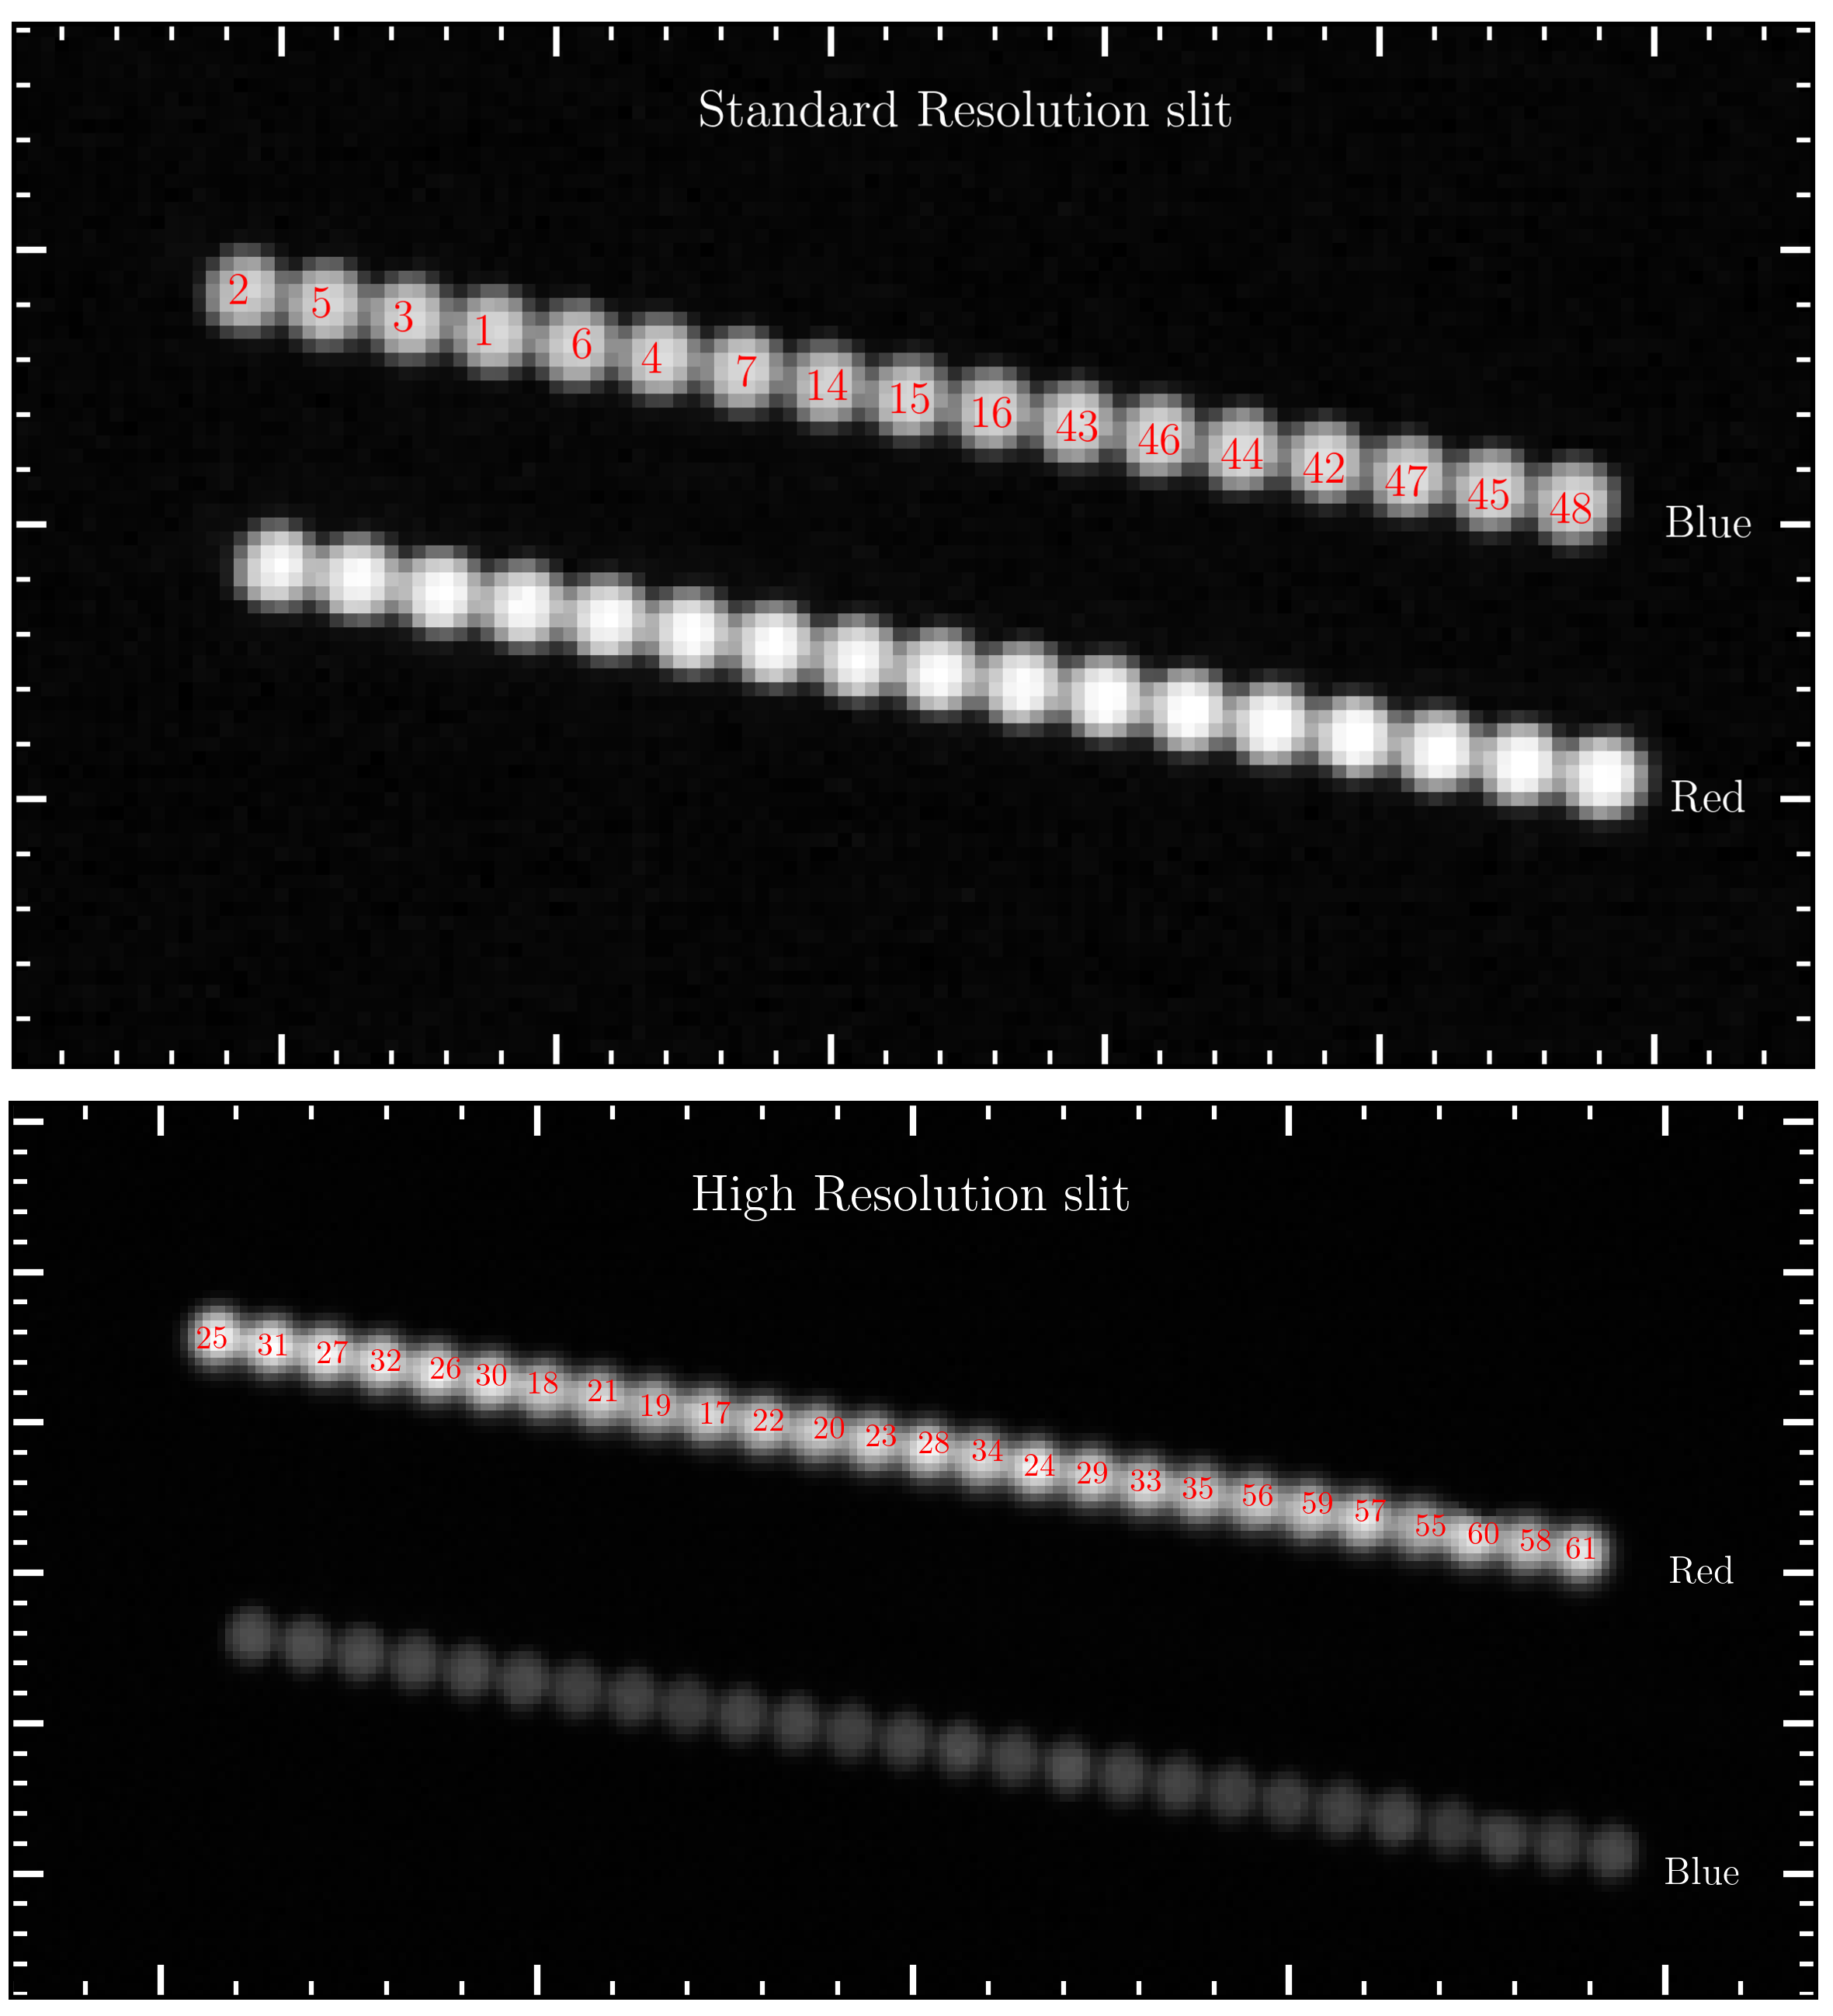 Images showing cutout of dual IFU standard resolution slit unit flat (top) and cutout of the single IFU high resolution slit unit flat (bottom).